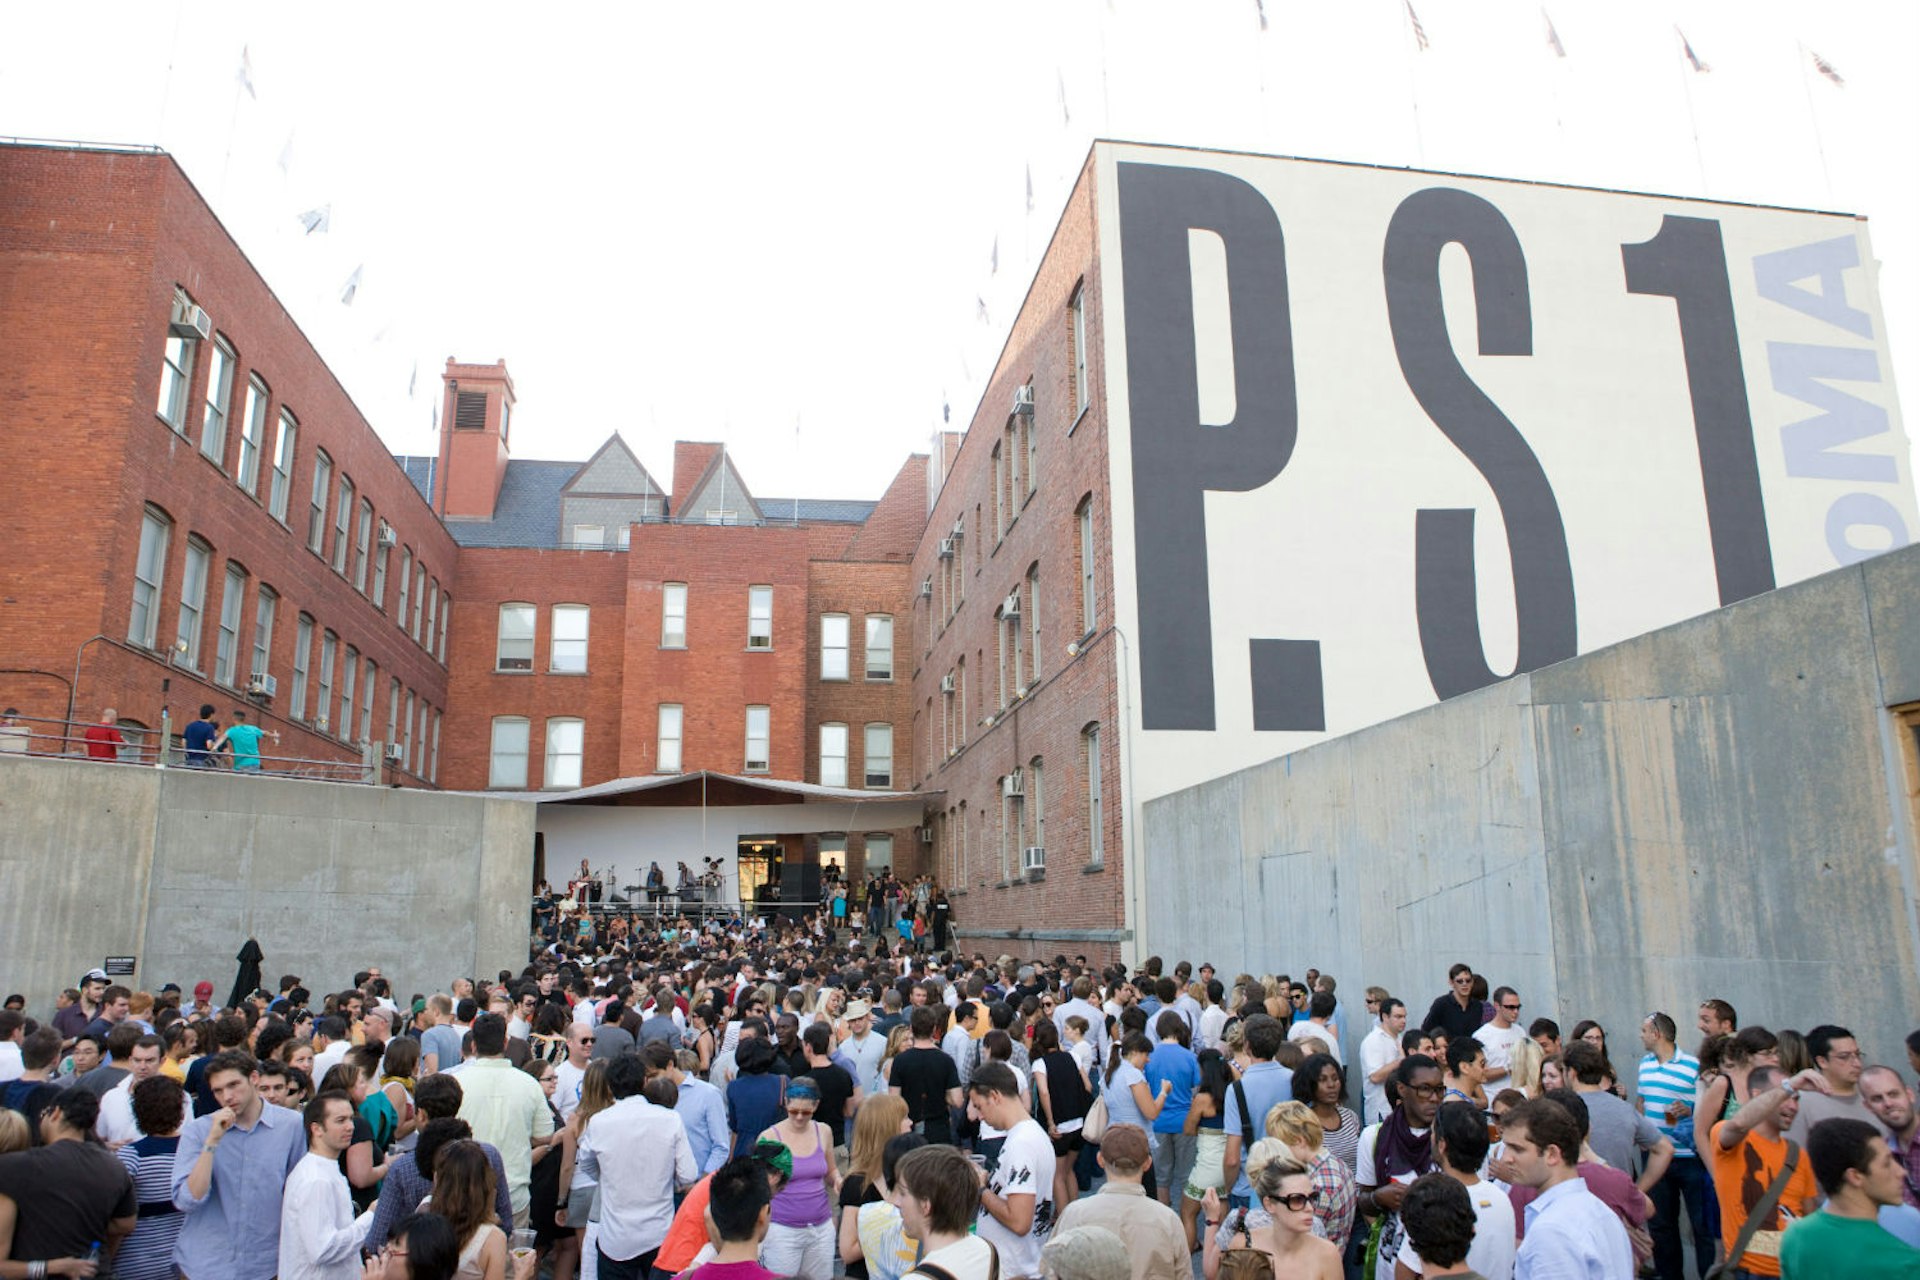 Crowds gather for PS1's annual Warm Up music series. Image courtesy of the Queens Tourism Council.